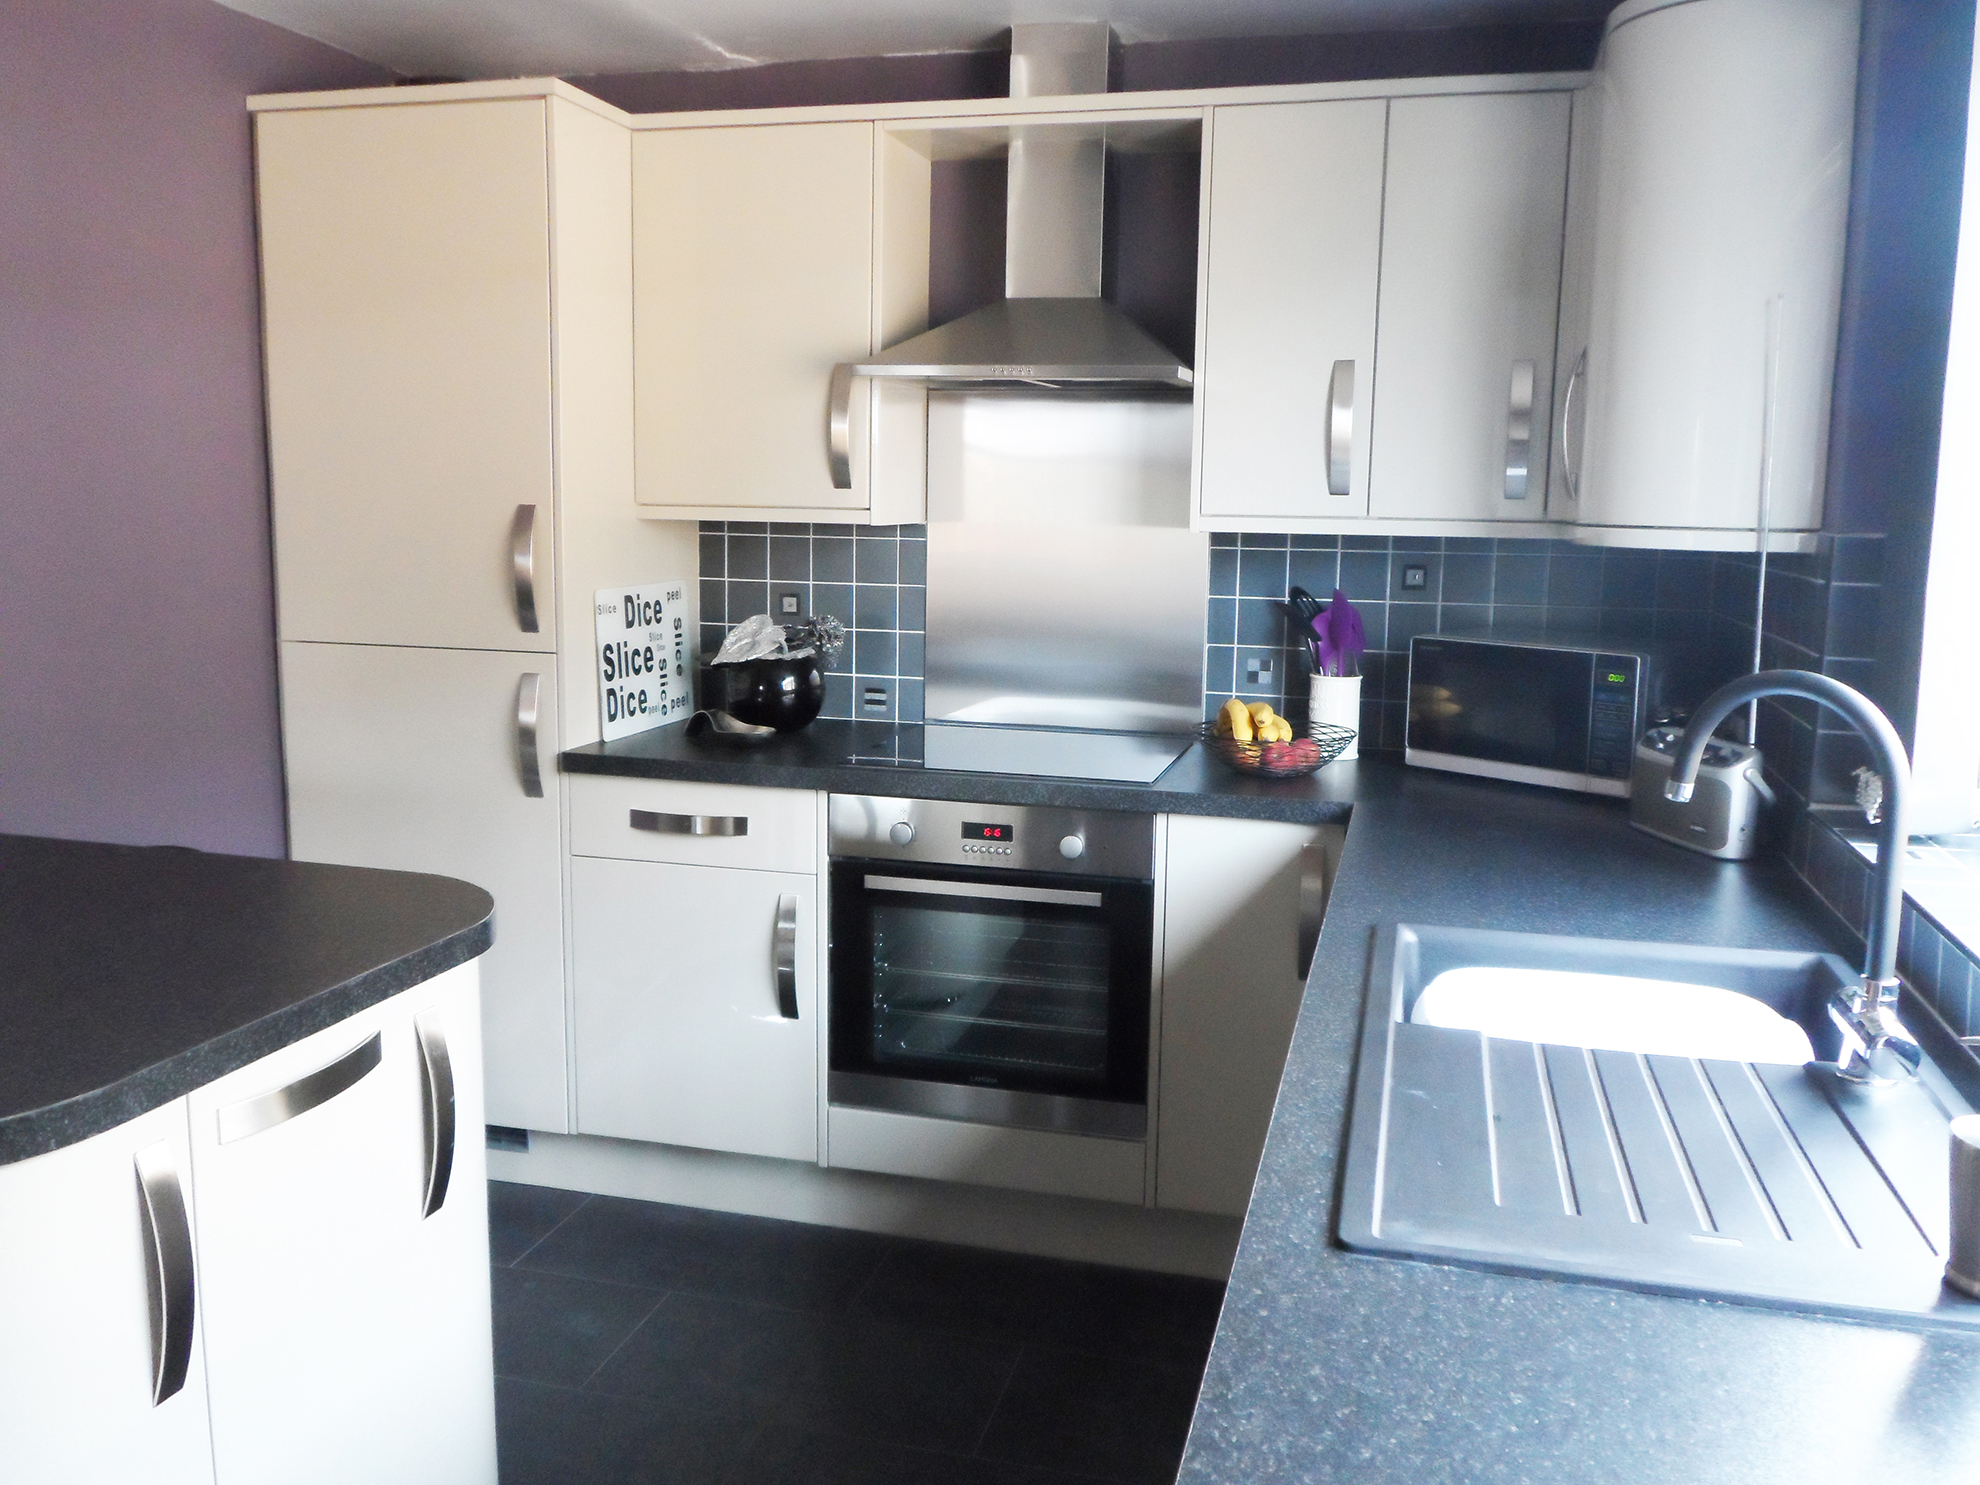 Gloss grey cabinets with black square edge worktops. Feature curved cabinets.